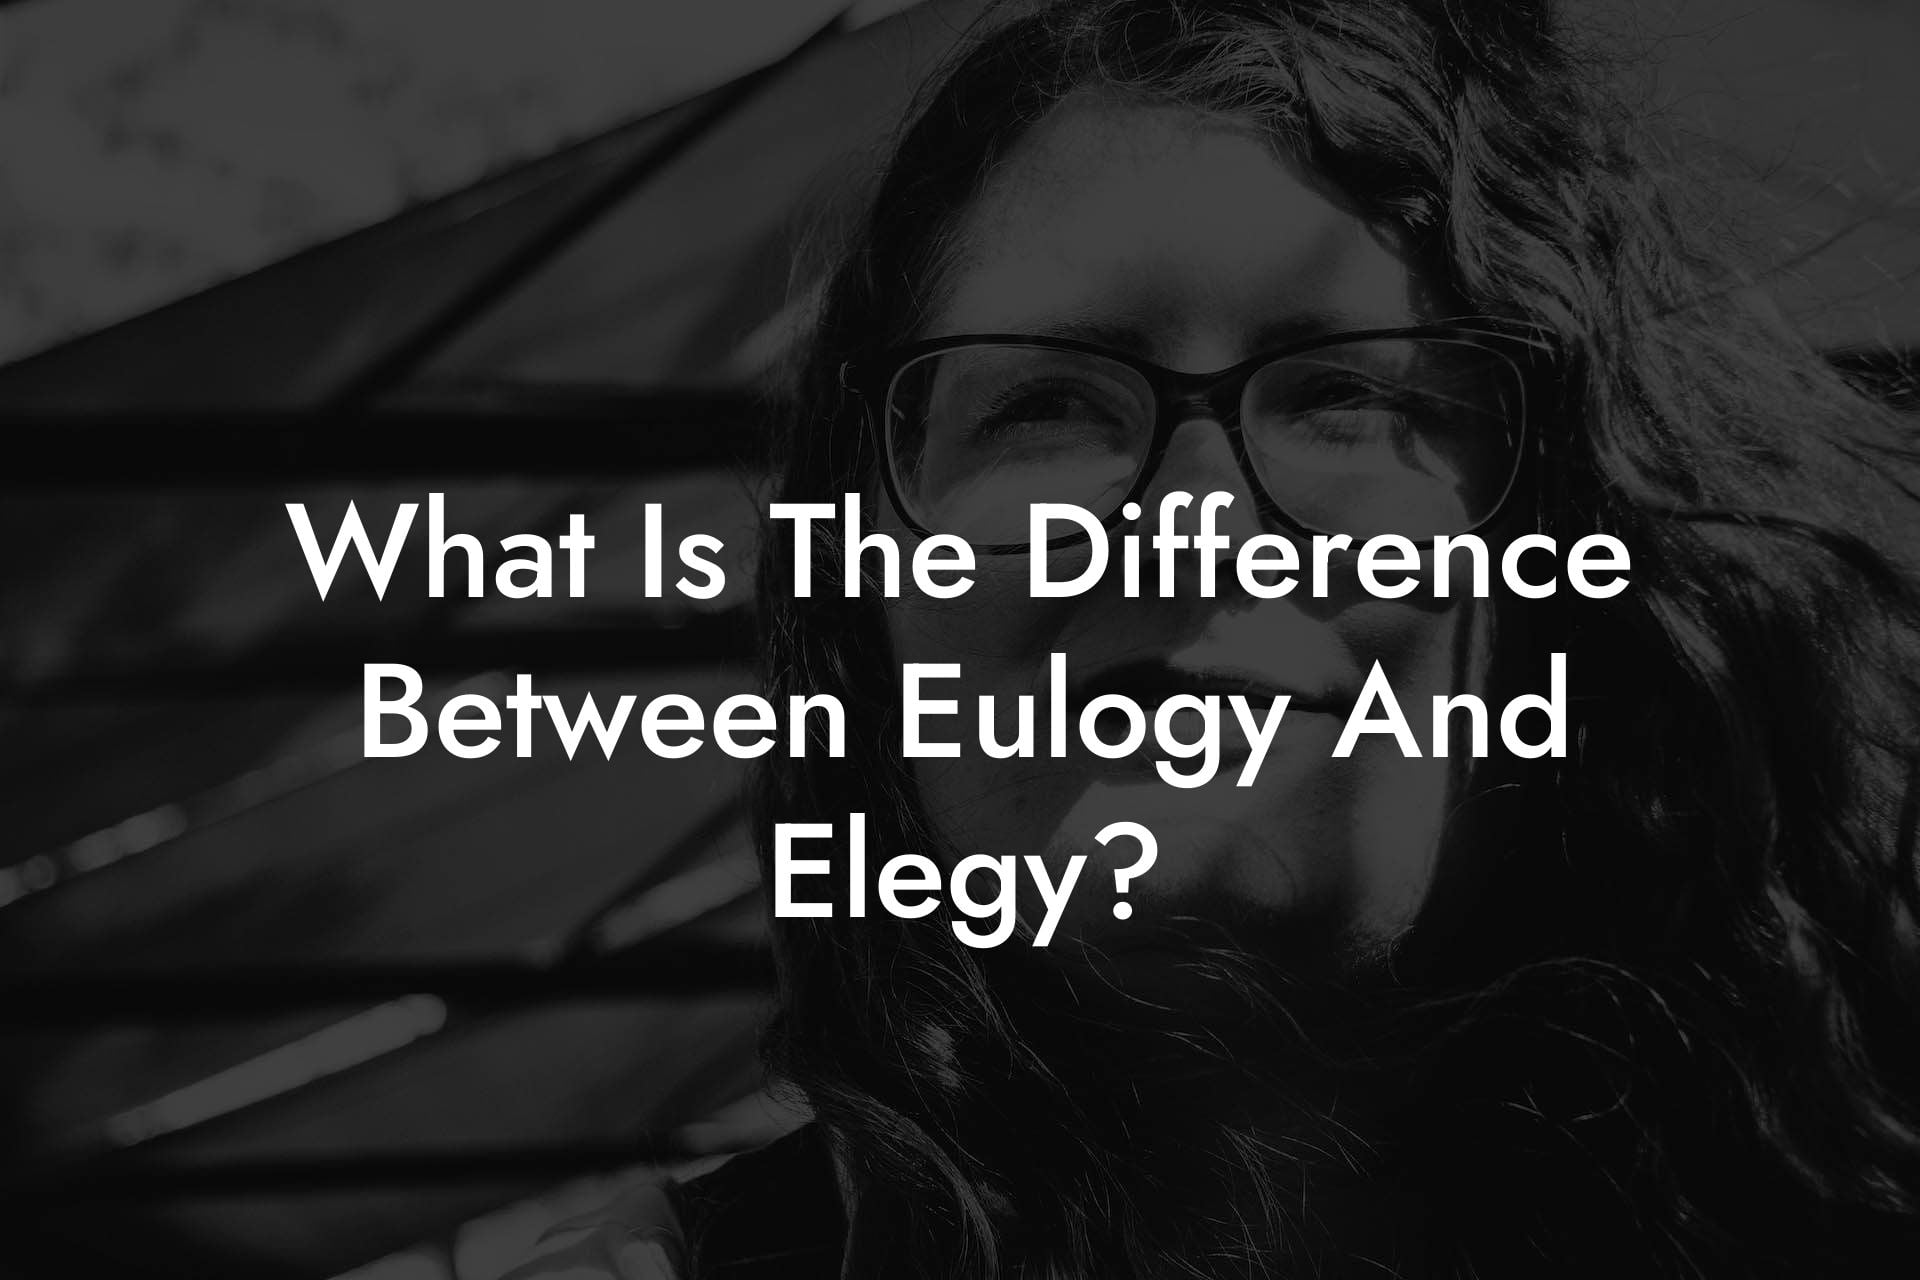 What Is The Difference Between Eulogy And Elegy?